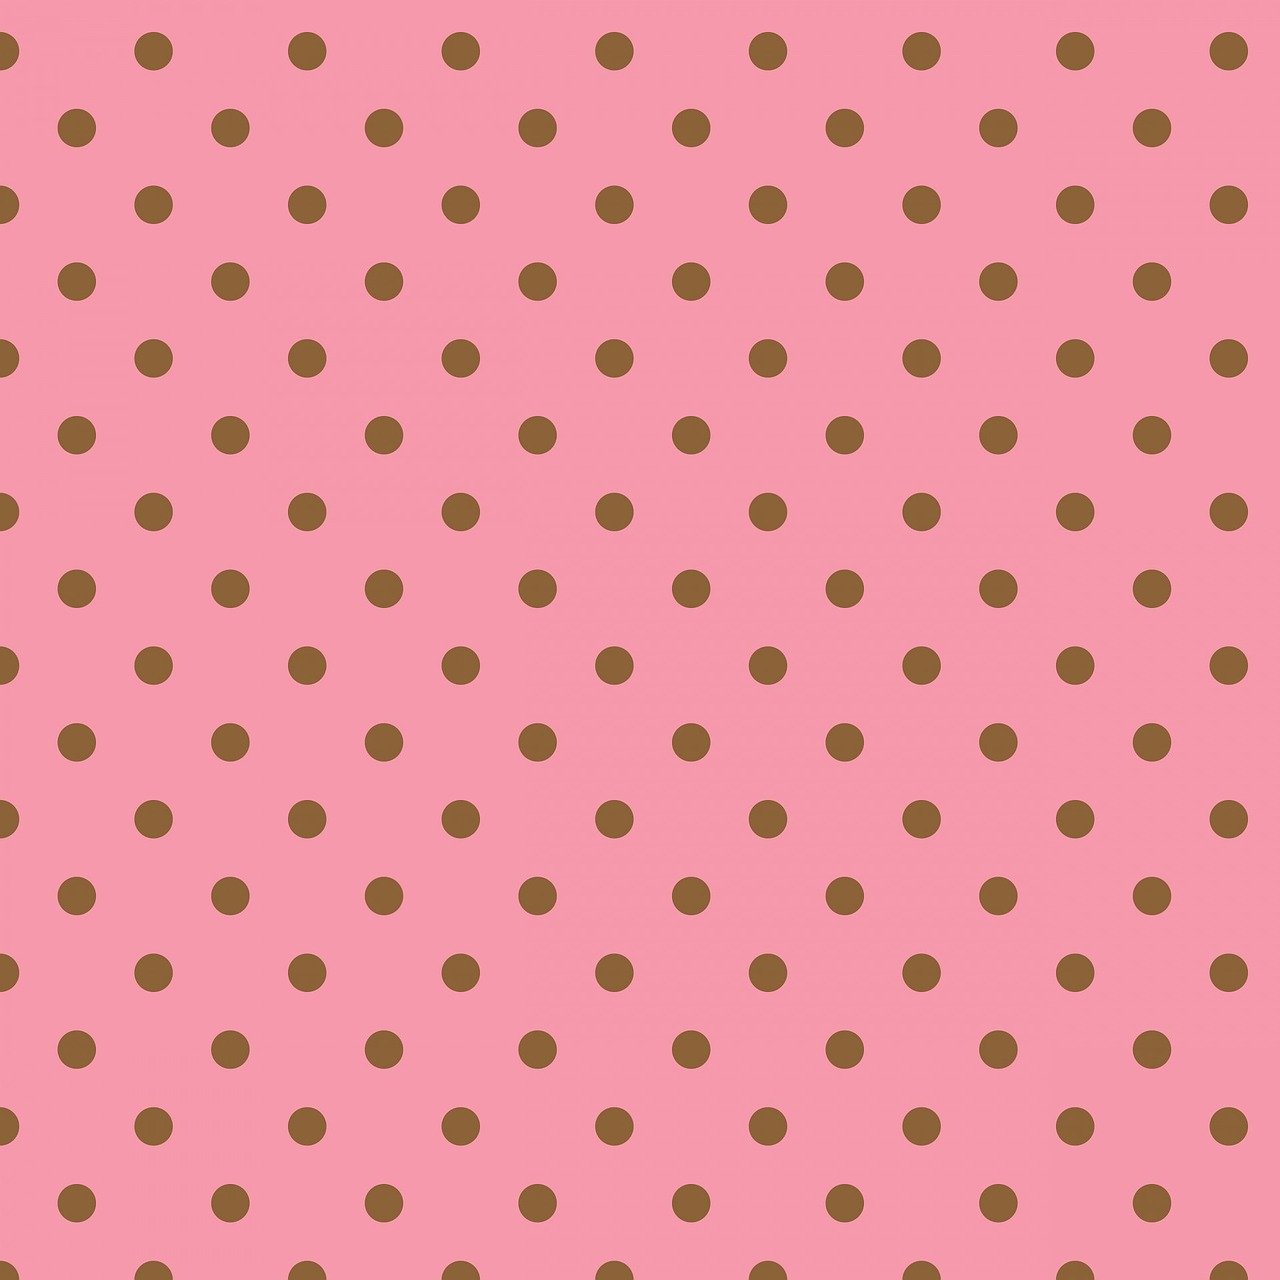 a brown polka dot pattern on a pink background, inspired by Katsushika Ōi, pop art, graphic 4 5, 1200 dpi, pink and gold, pink and green